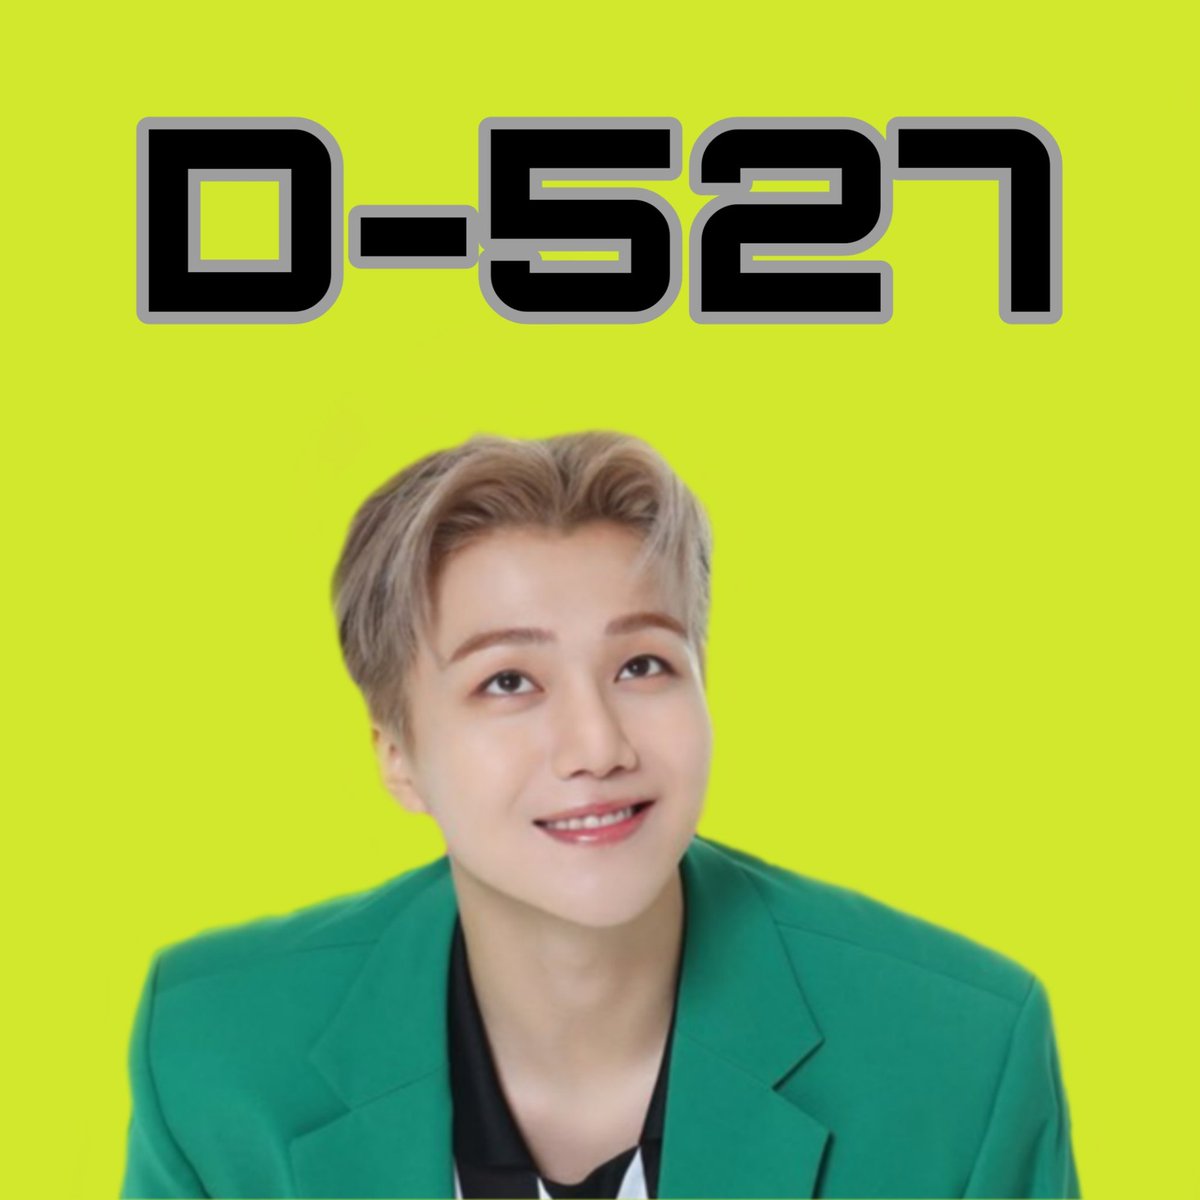 D-527- Jinho gooood morning!! Last night was very emotional night for all us. PenOn won the collab stage!! Our first win!  Though you're not part of it, still congratulations!! Have a nice day Jinho I love you   #PENTAGON  #Jinho  #펜타곤  #진호  @CUBE_PTG